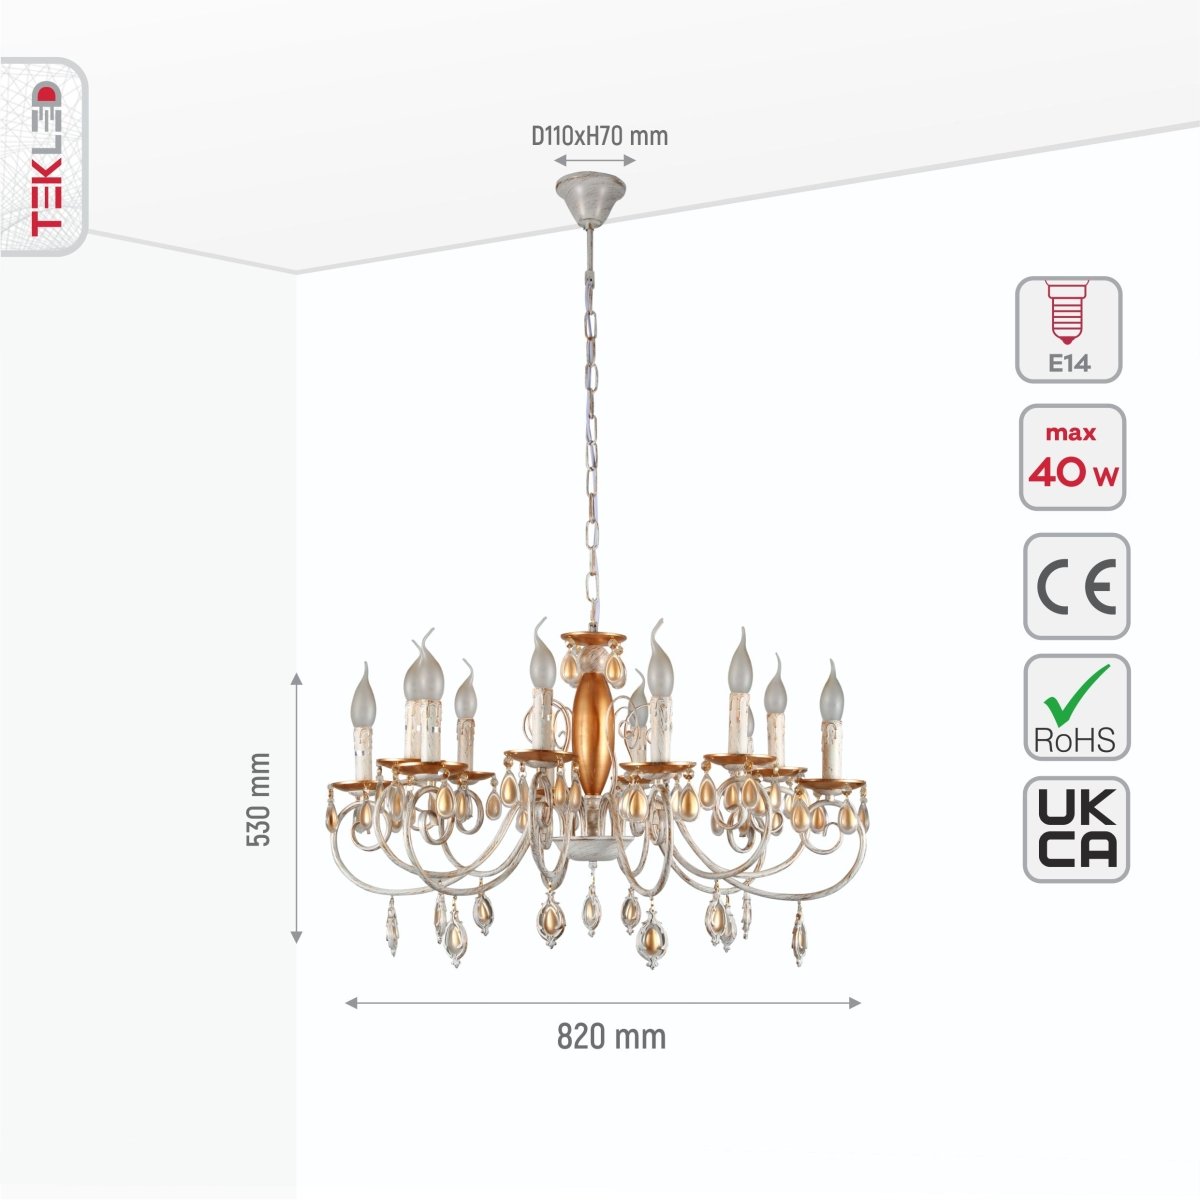 Size and specs of Amber Crystal Gold and White Metal 12 Arm Chandelier with E14 Fitting | TEKLED 158-19445